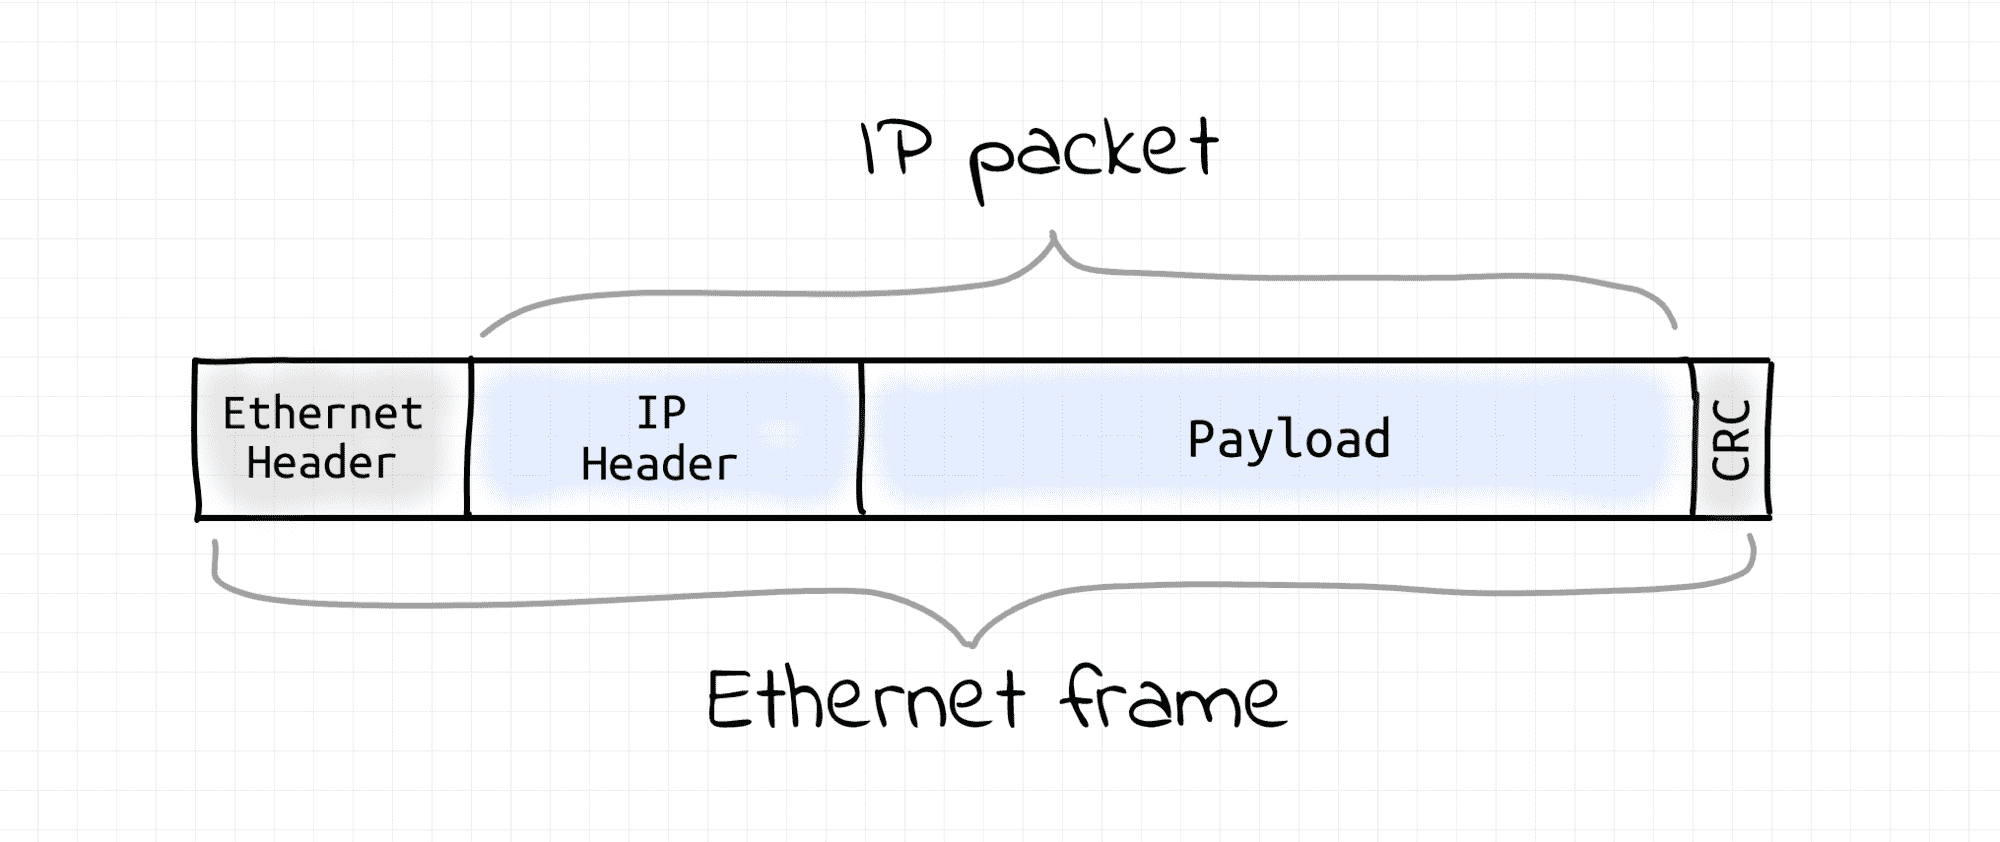 IP packet structure.